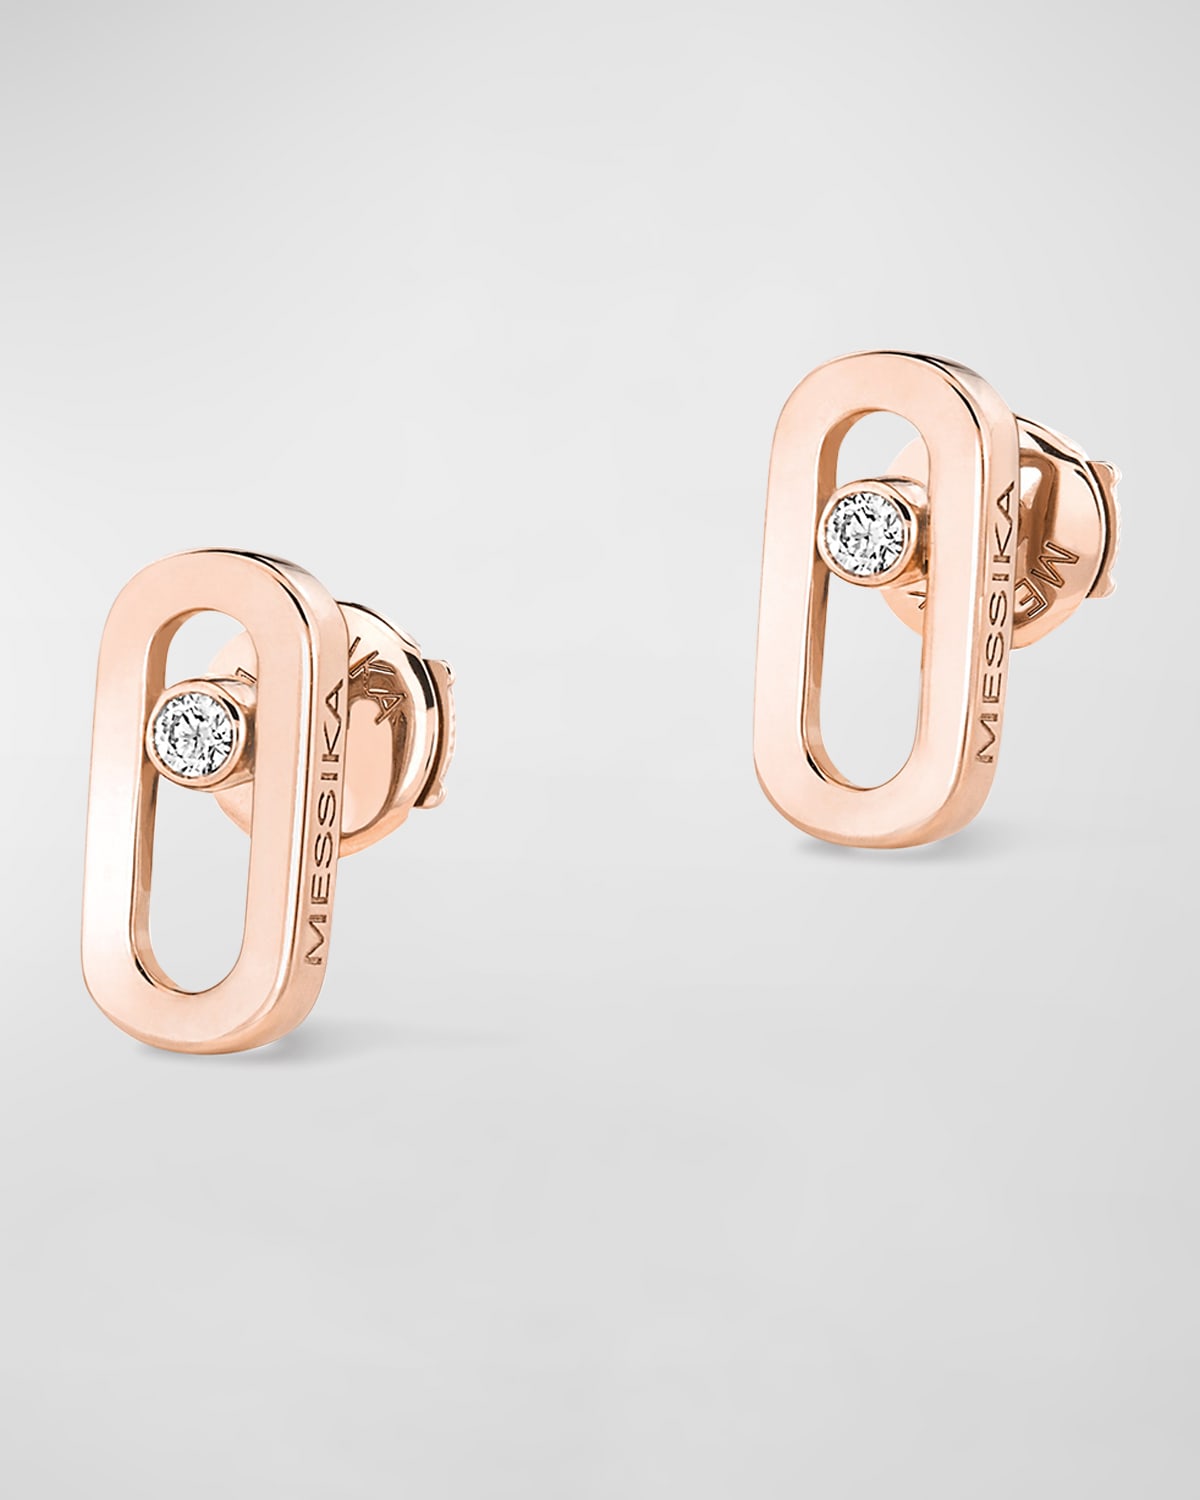 Messika Move Uno 18K Rose Gold Free-Moving Diamond Stud Earrings